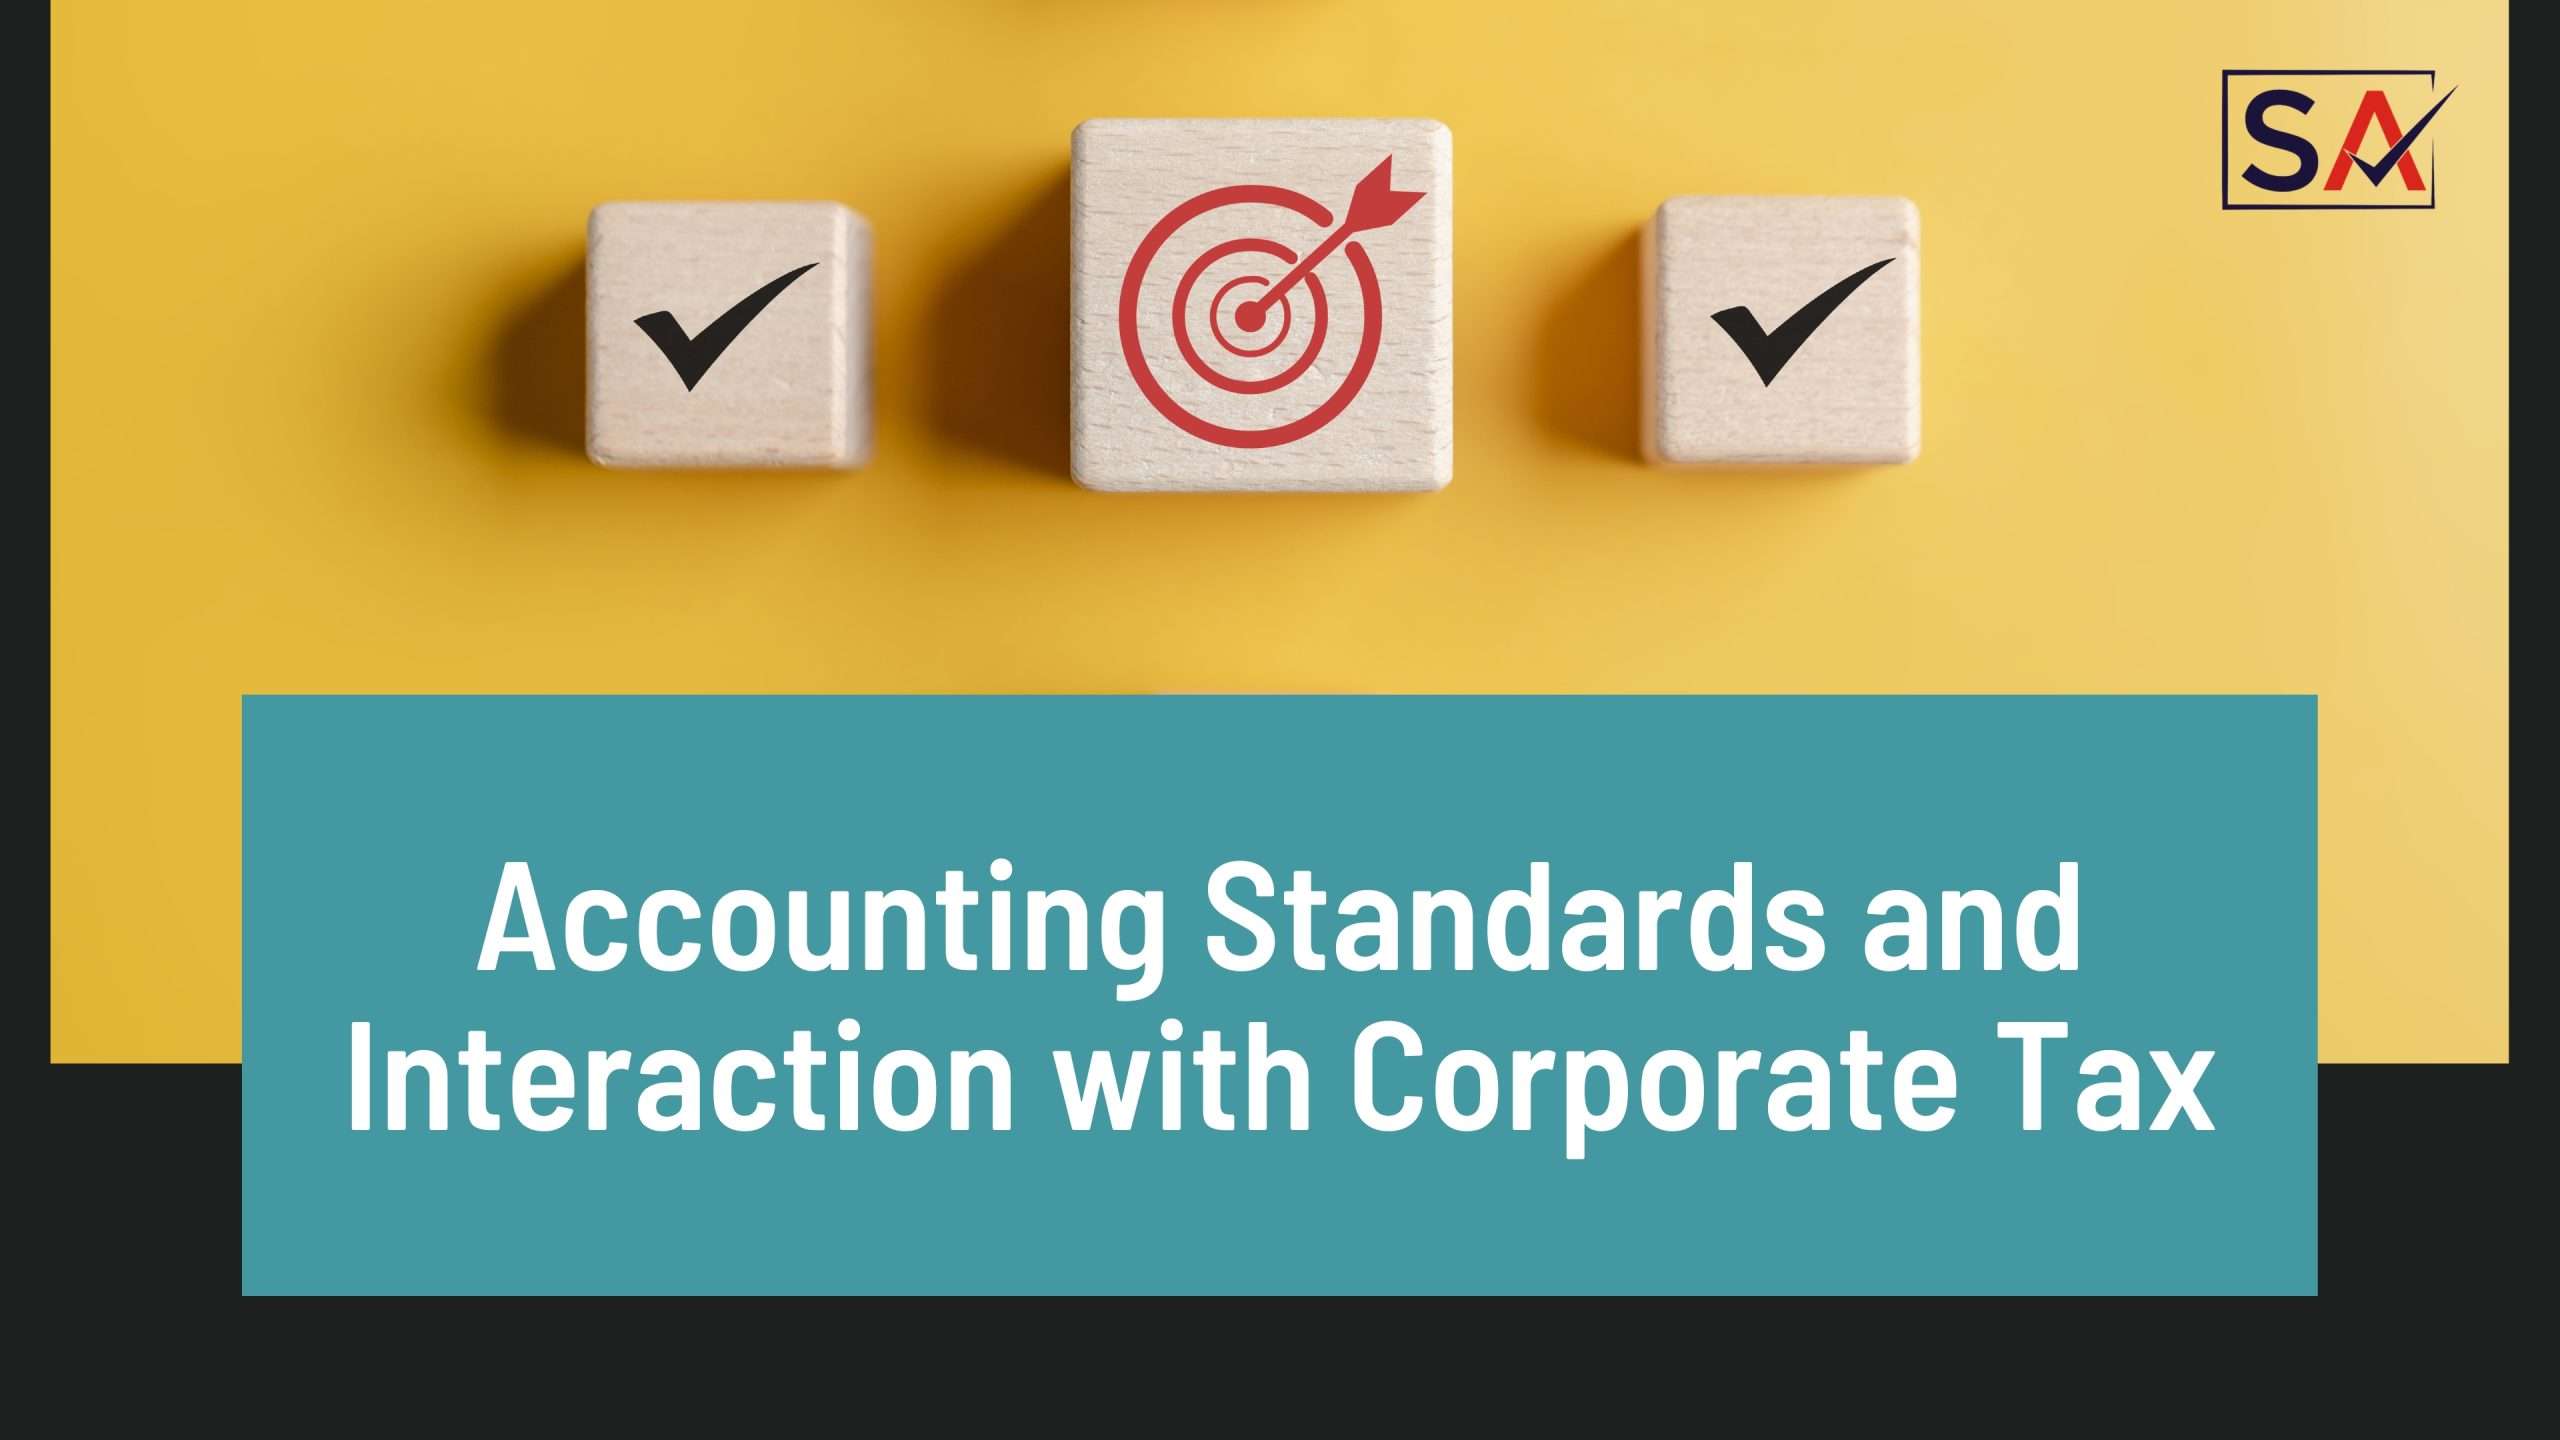 Accounting Standards and Interaction with Corporate Tax